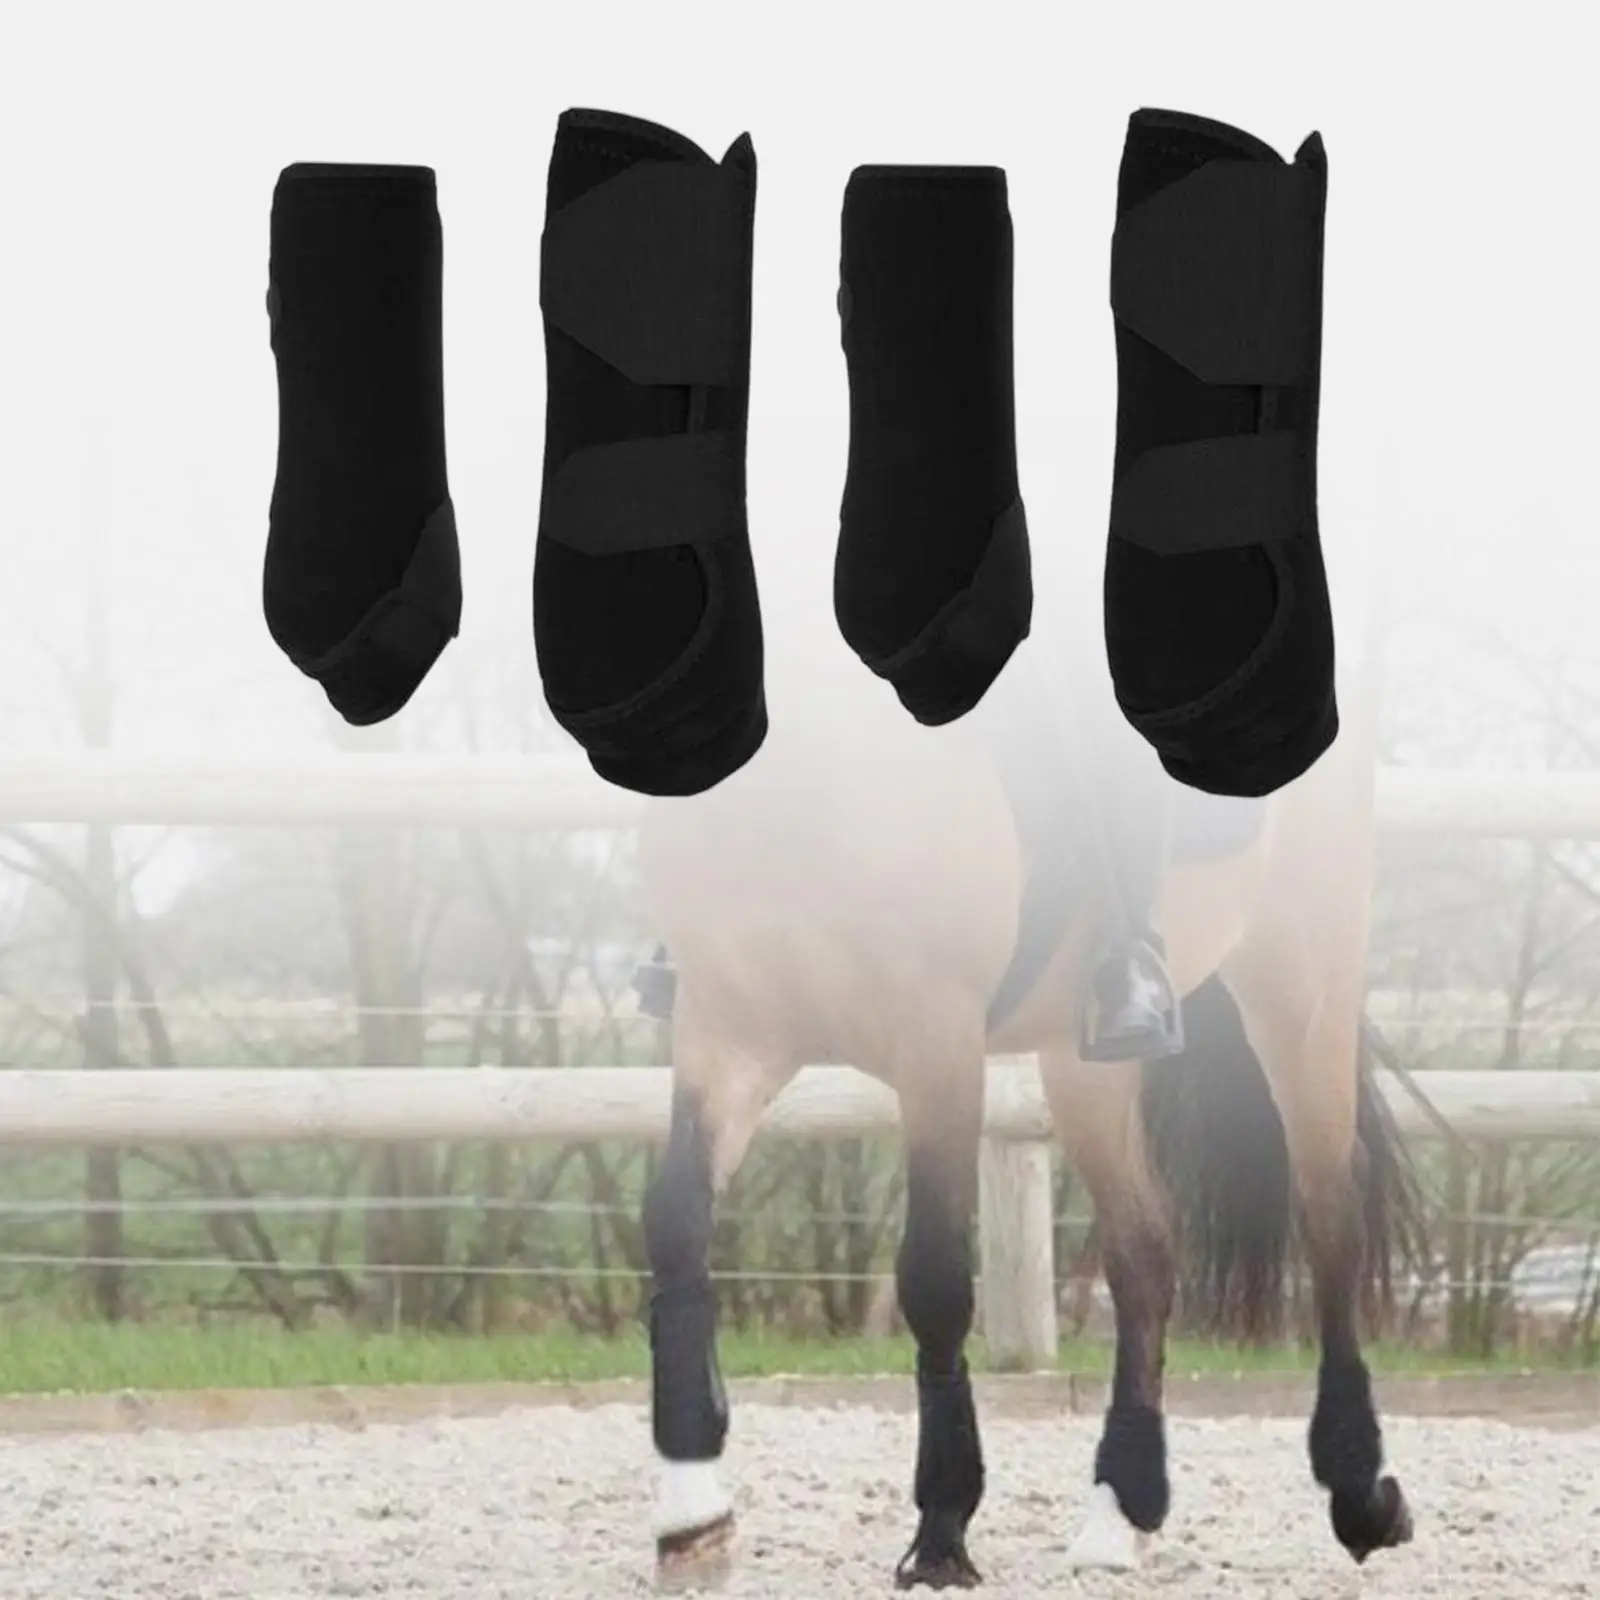 4Pcs Neoprene Horse Boots Leg Wraps Shock Absorbing Protector Guard for Jumping Riding Training Equestrian Equipment